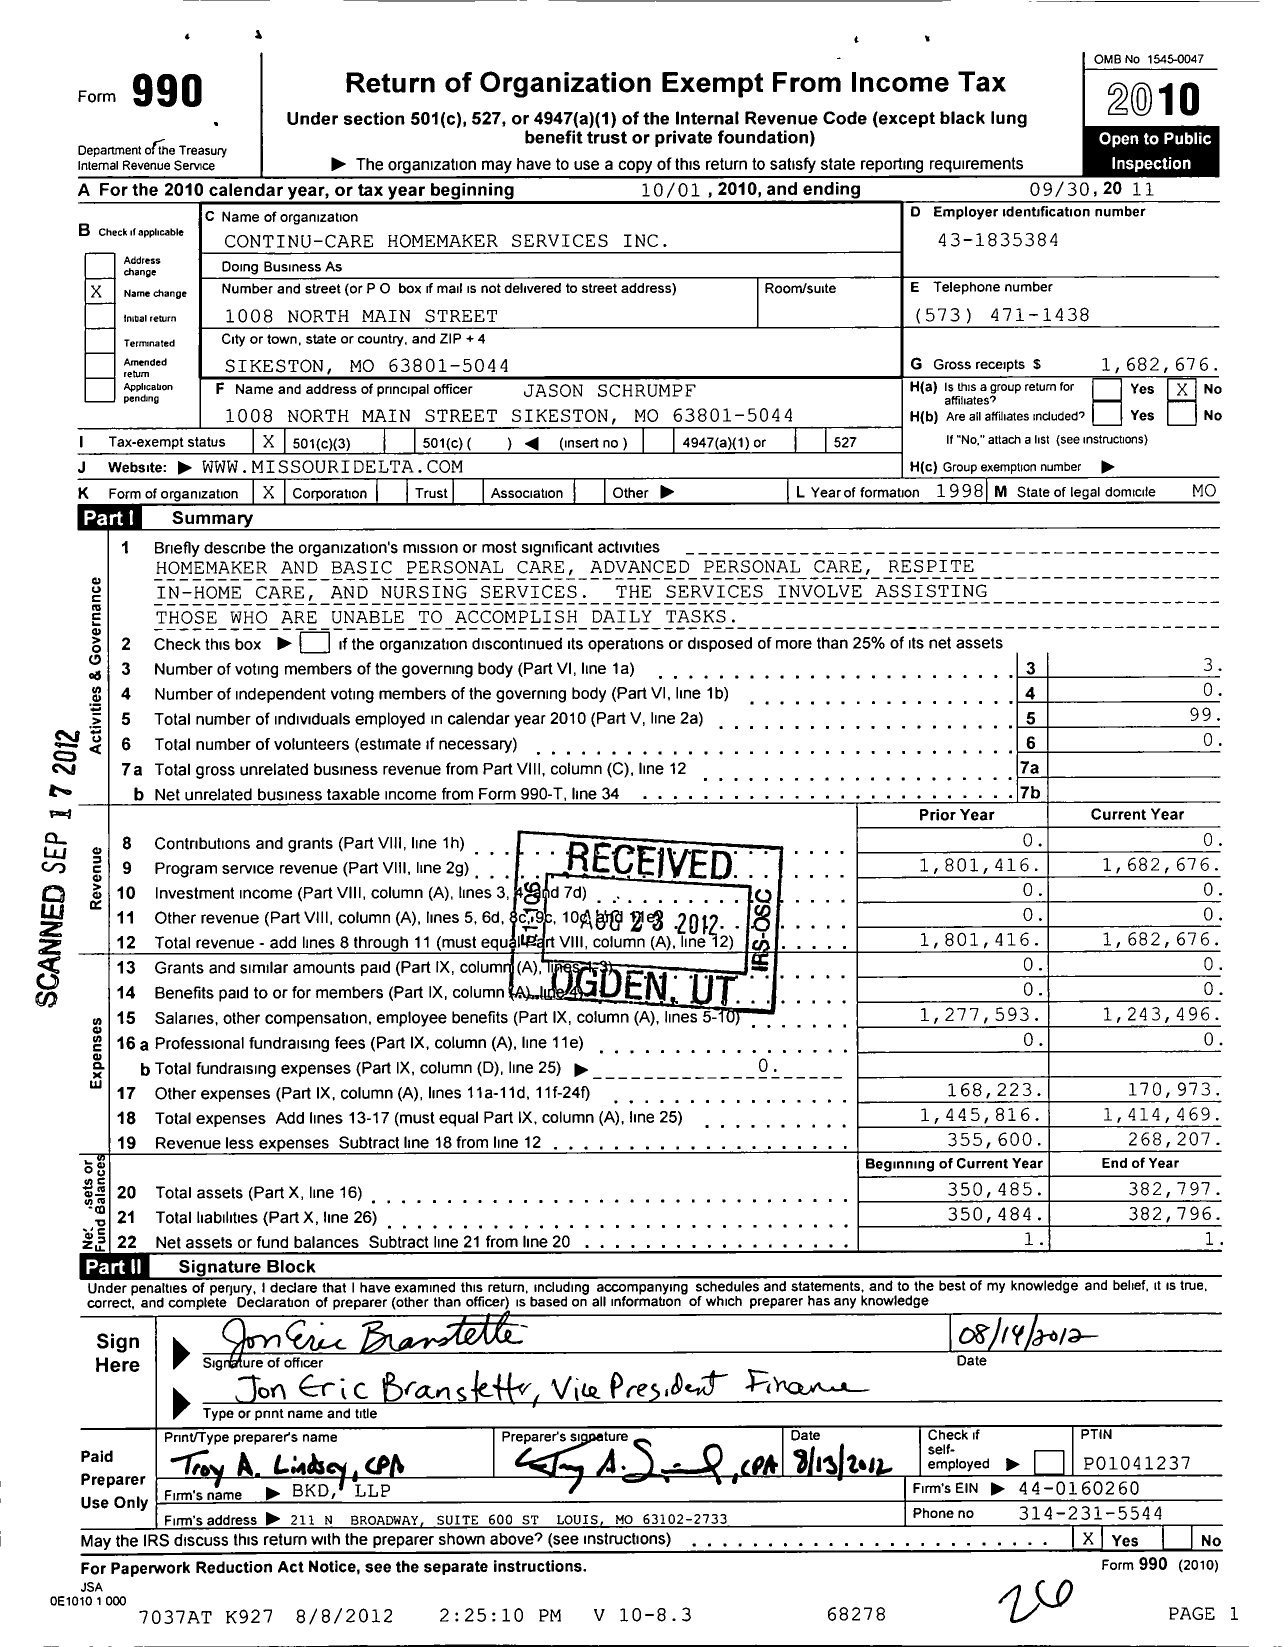 Image of first page of 2010 Form 990 for Continu-Care Homeaker Services